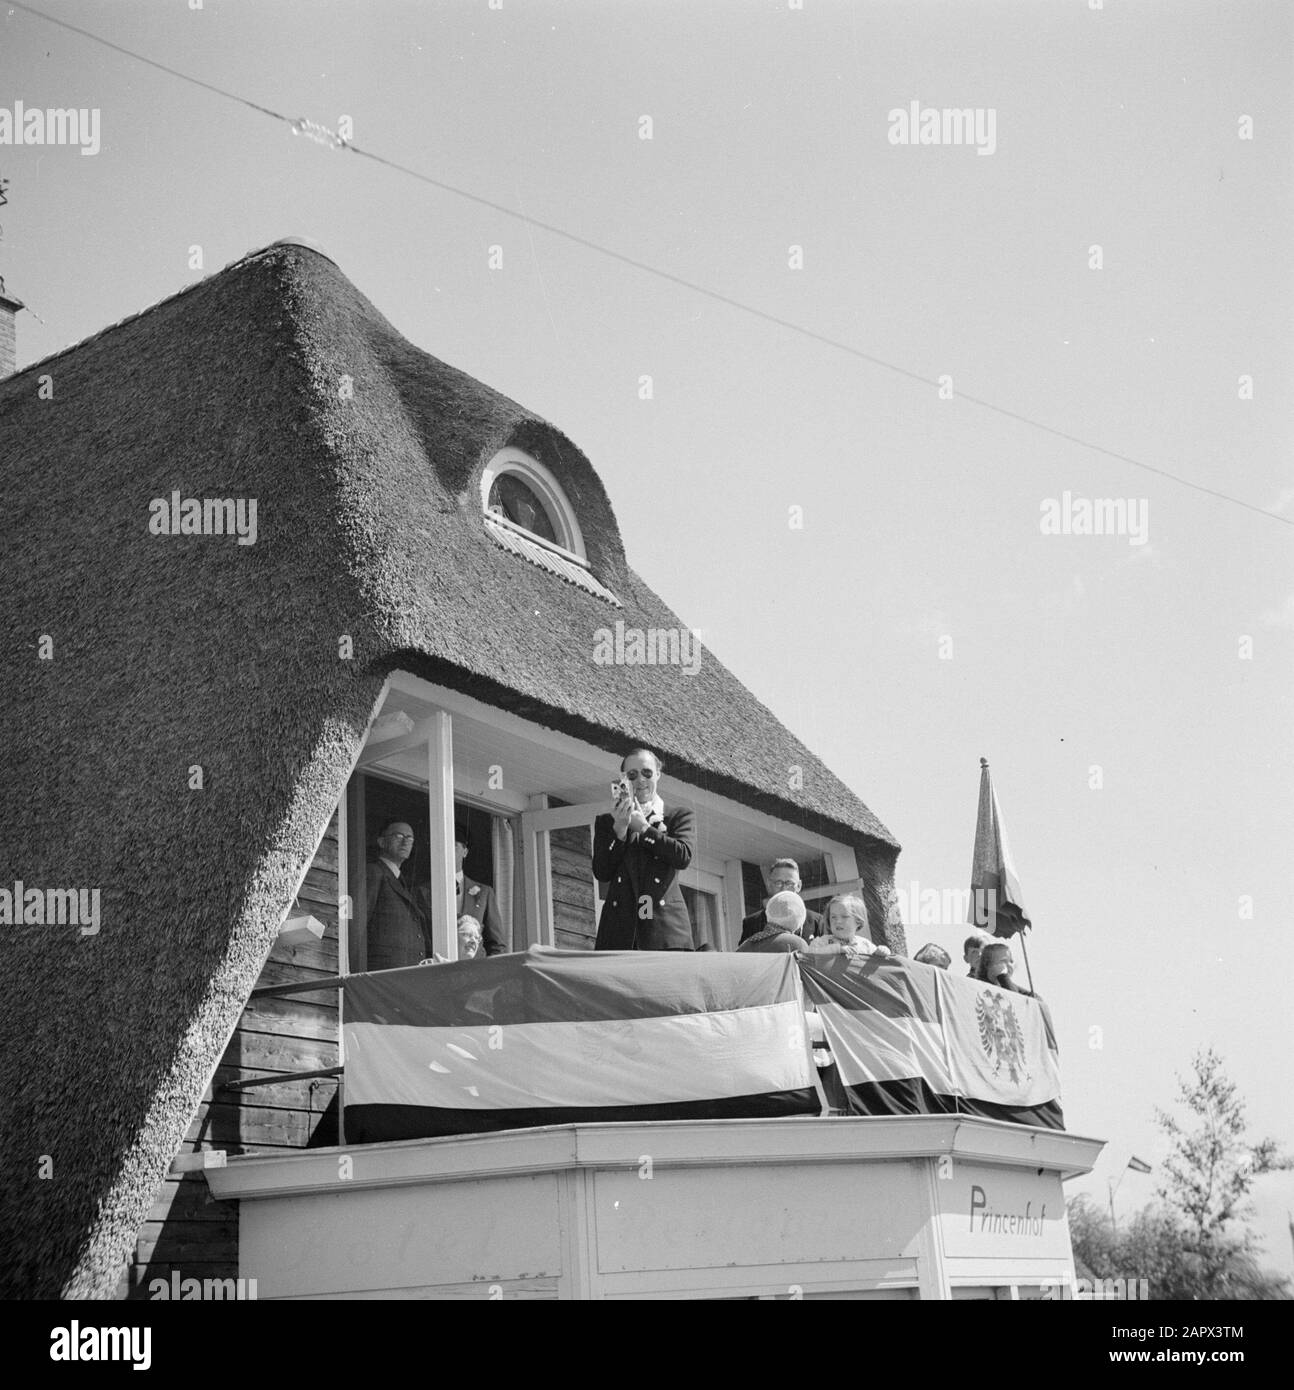 The princely family in Friesland  Prins Bernhard films from the balcony of Hotel Princenhof in Eernewoude Date: 1947 Location: Friesland, Tietsjerksteradeel Keywords: film cameras, royal house, princsen Personal name: Bernhard, prince Stock Photo